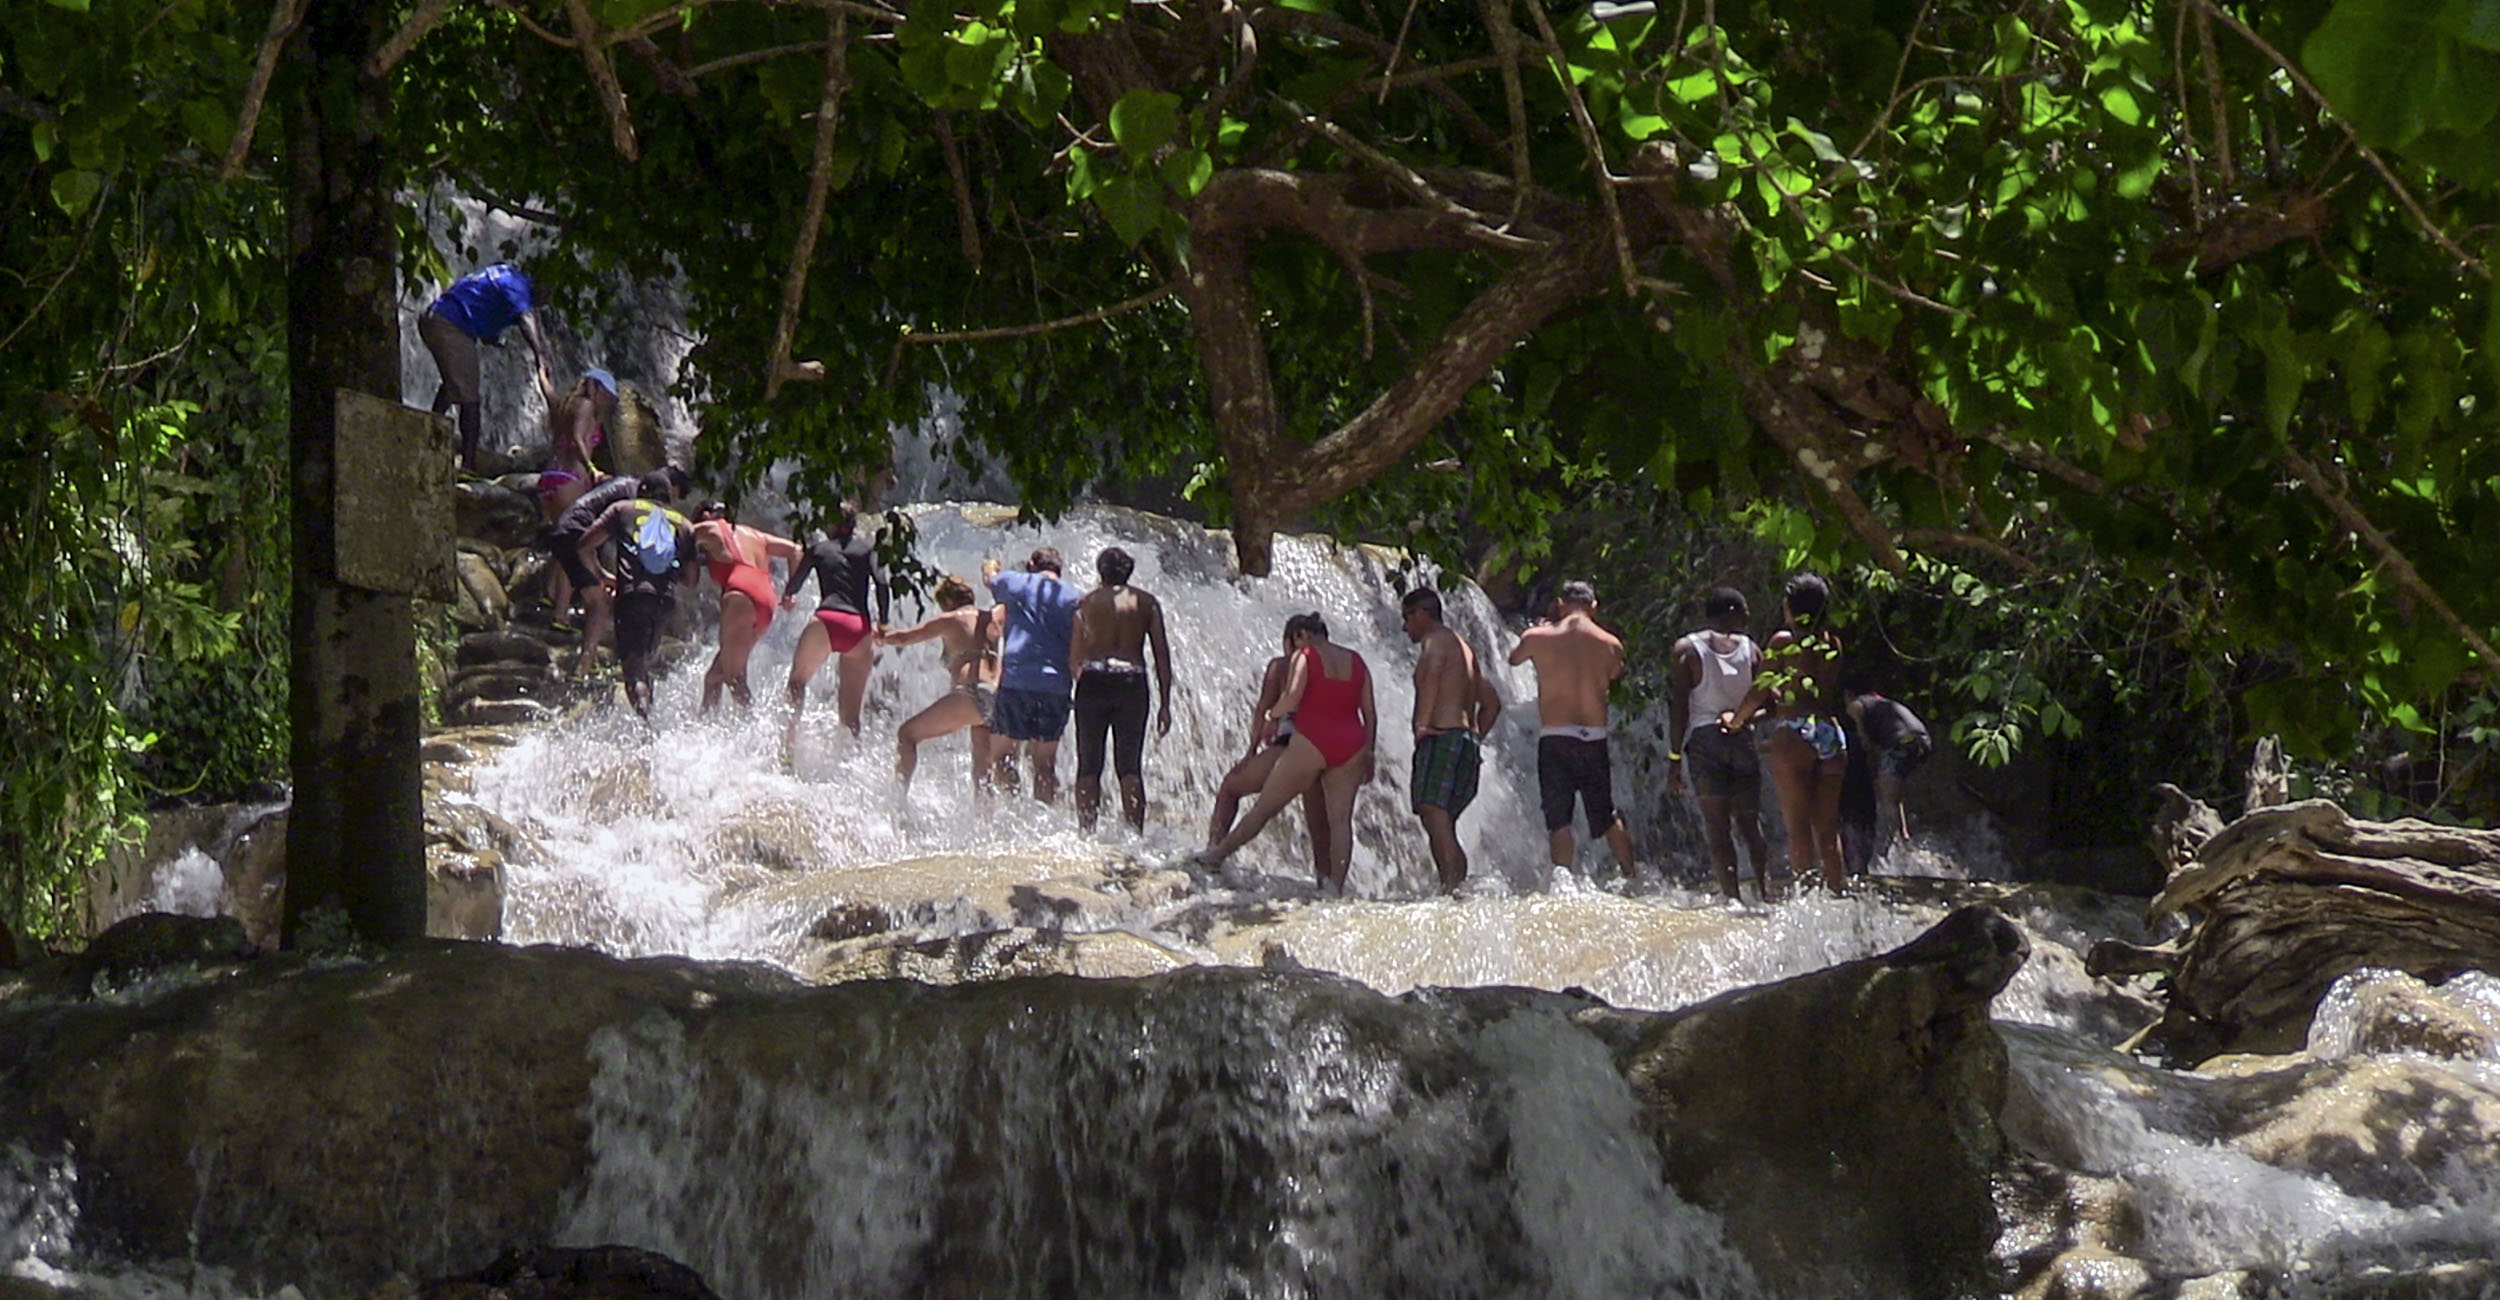 Dunns River Falls - Fly High Taxi and Tours Jamaica - www.flyhightaxiandtoursjamaica.com - www.flyhightaxiandtoursjamaica.net